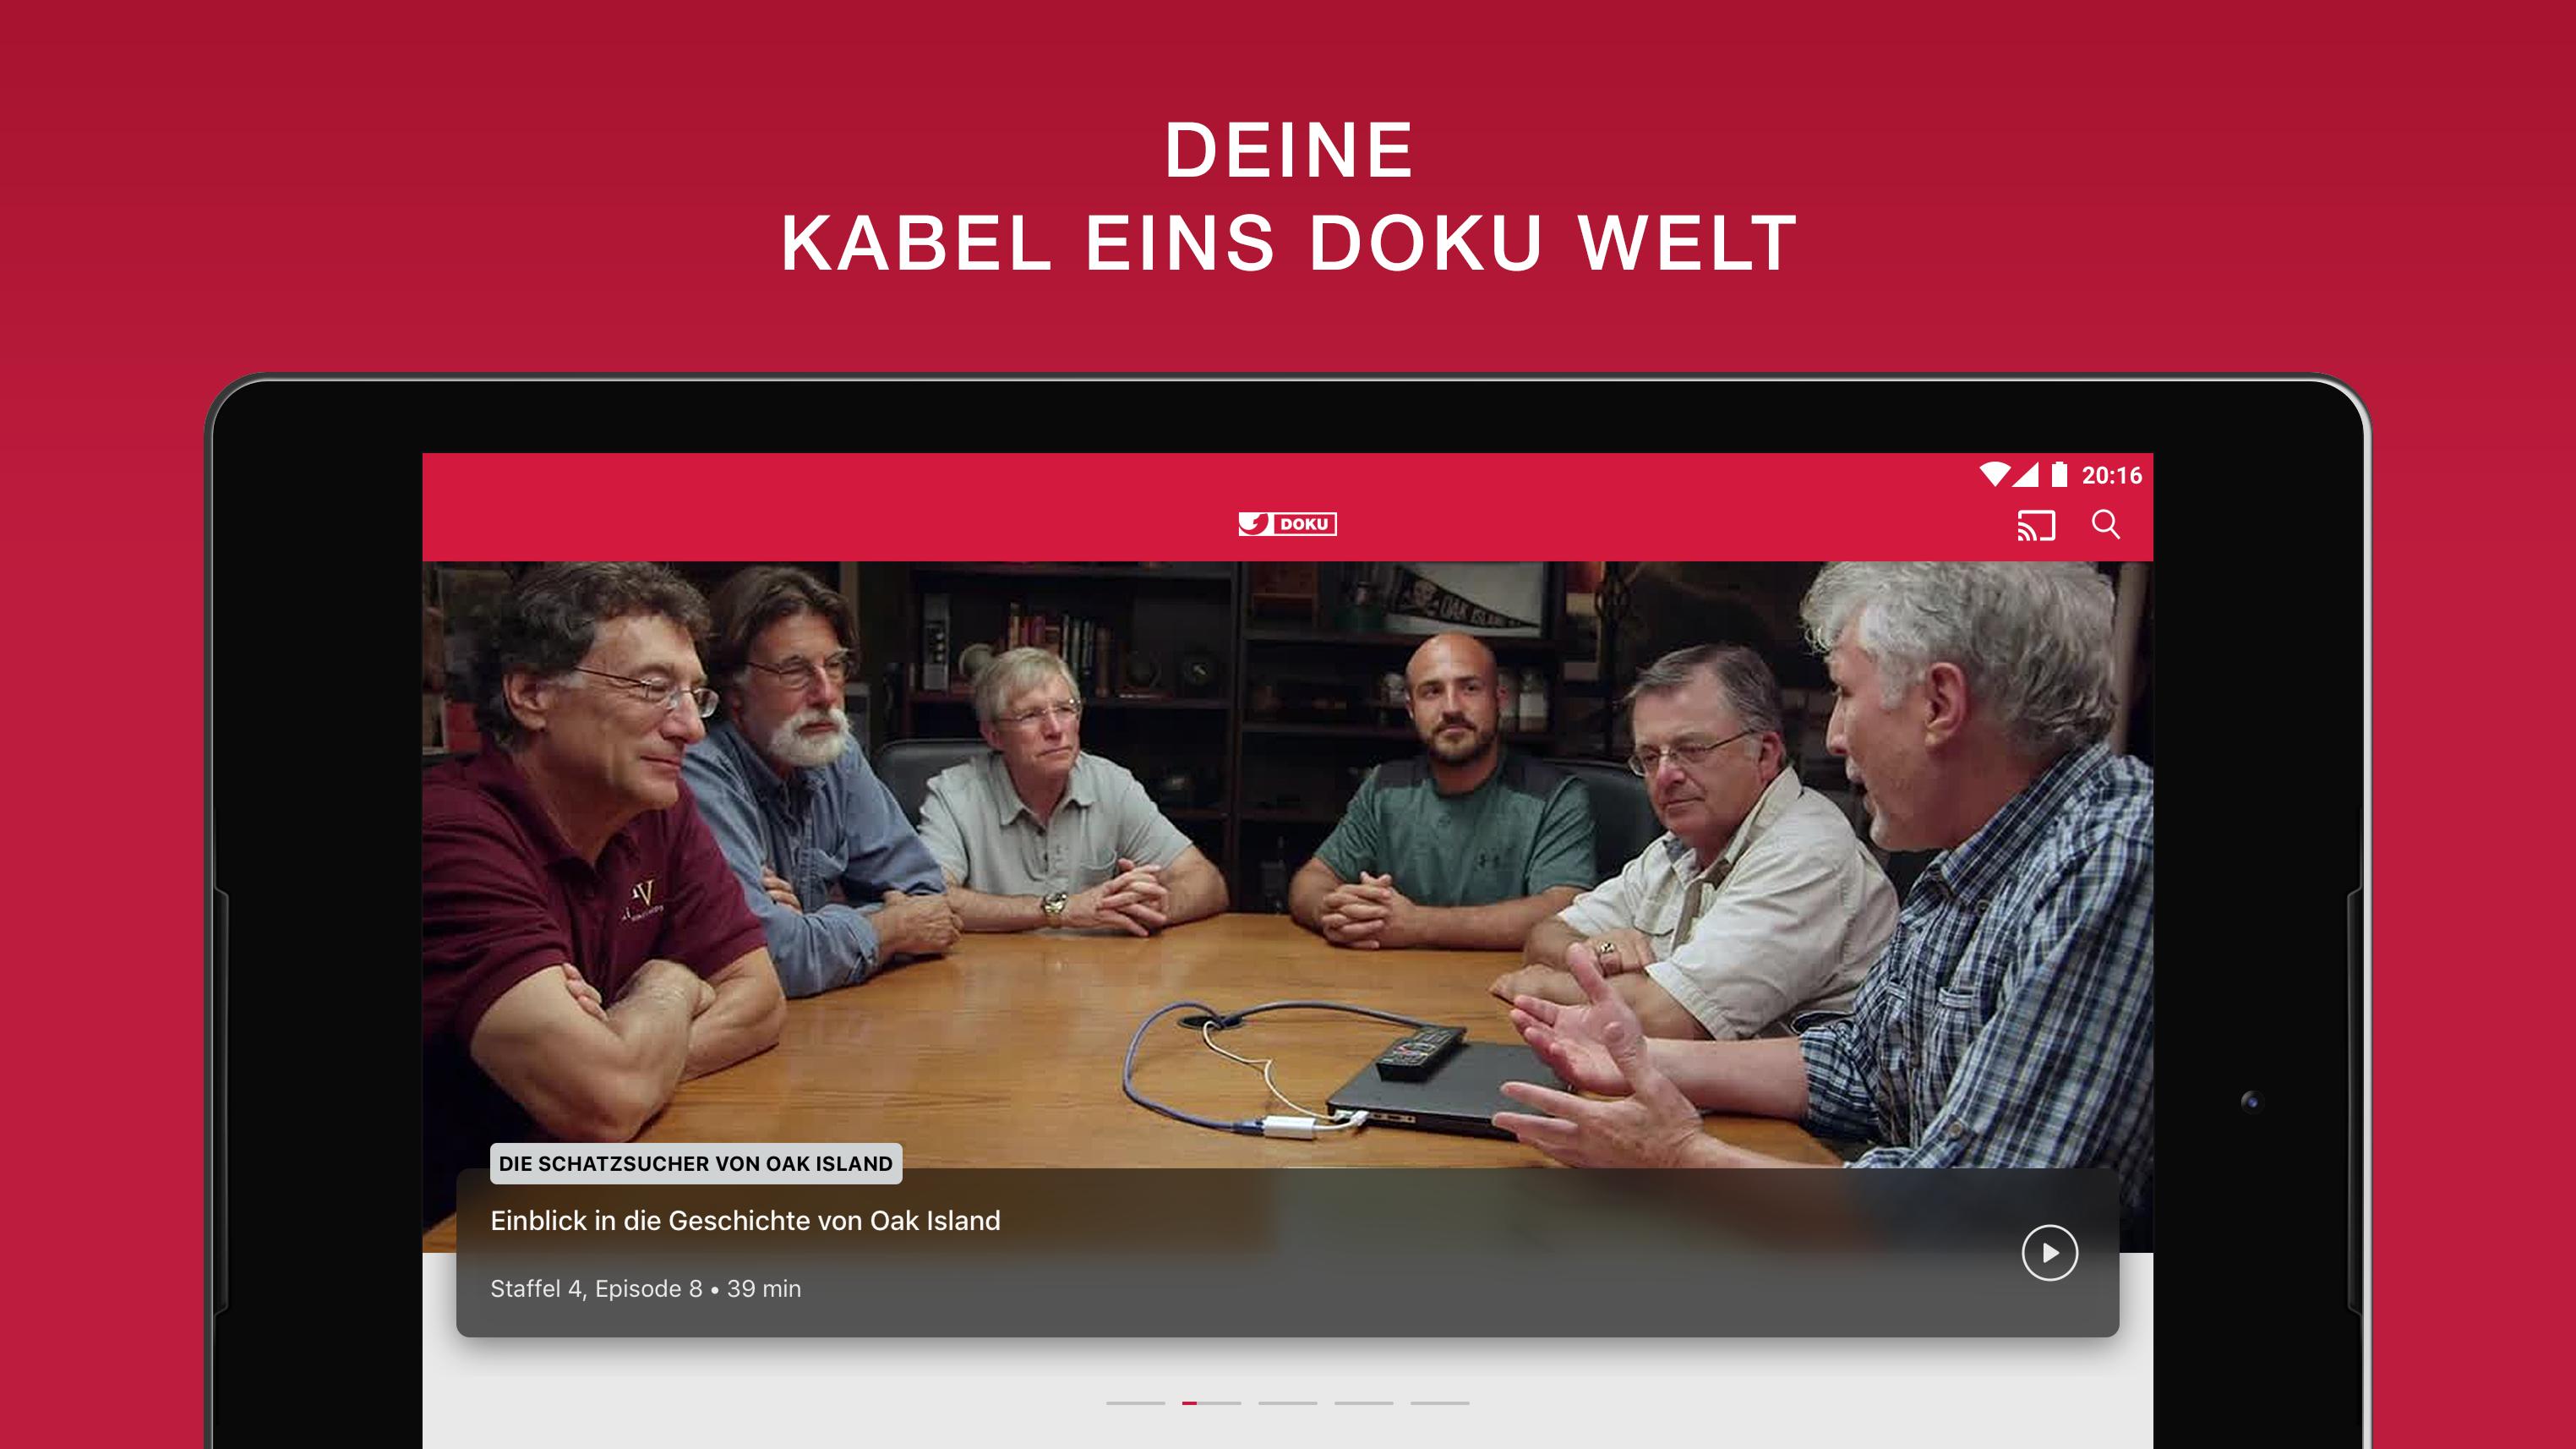 Kabel Eins Doku for Android - APK Download